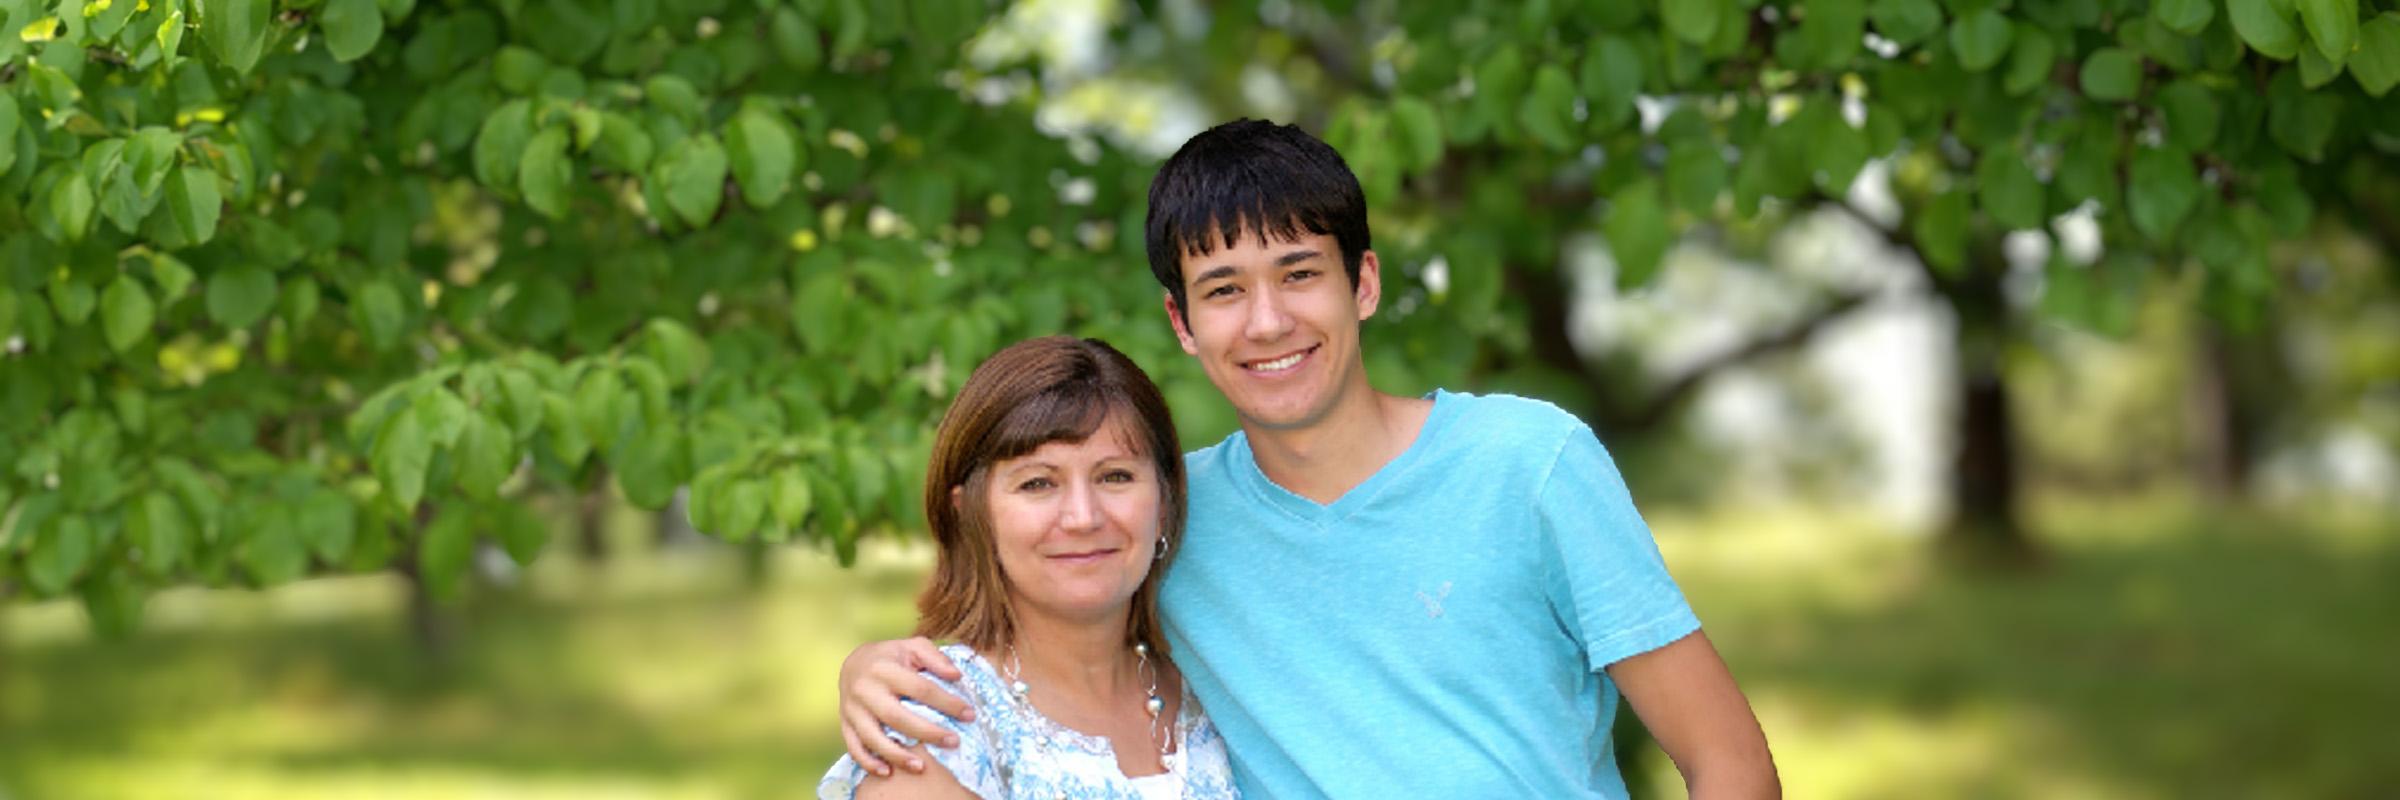 Photo of mother and son hugging each other facing camera smiling. A blurred background of outdoor scenery is behind them.